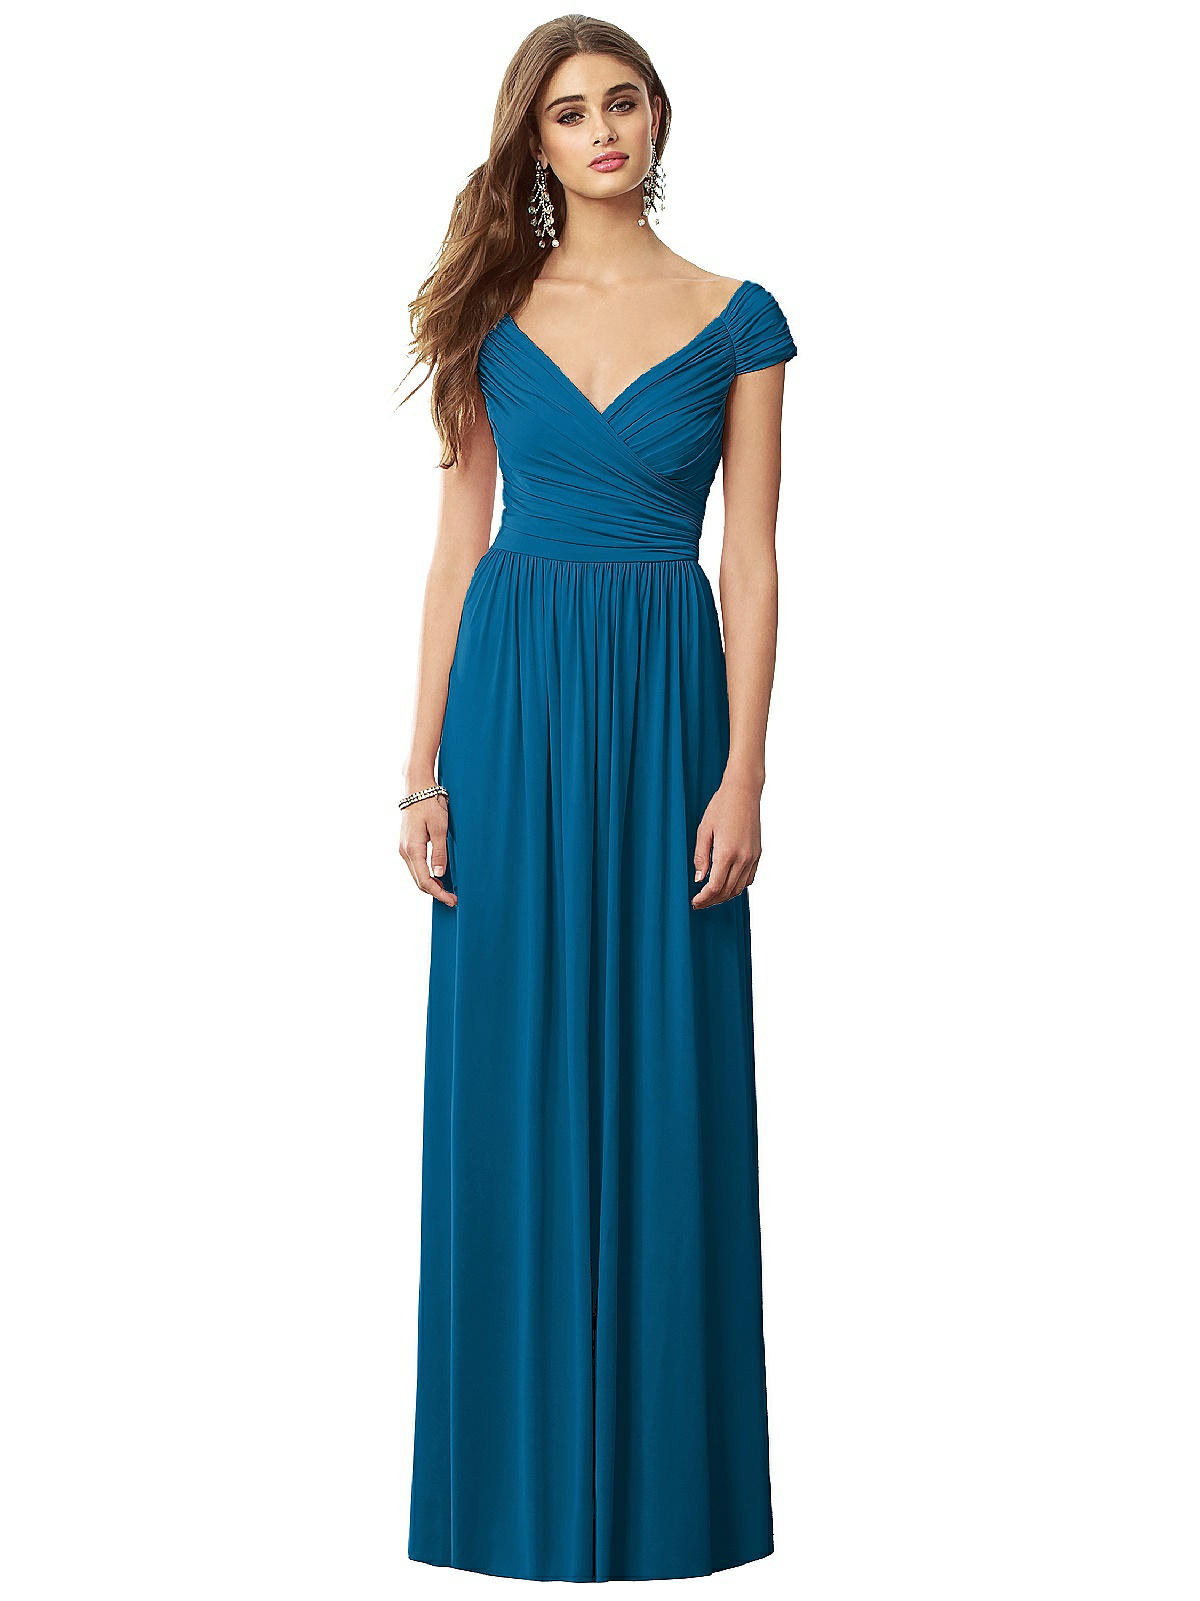 Six Bridesmaid The After In Dessy 6697 Group | Blue Ocean Dress